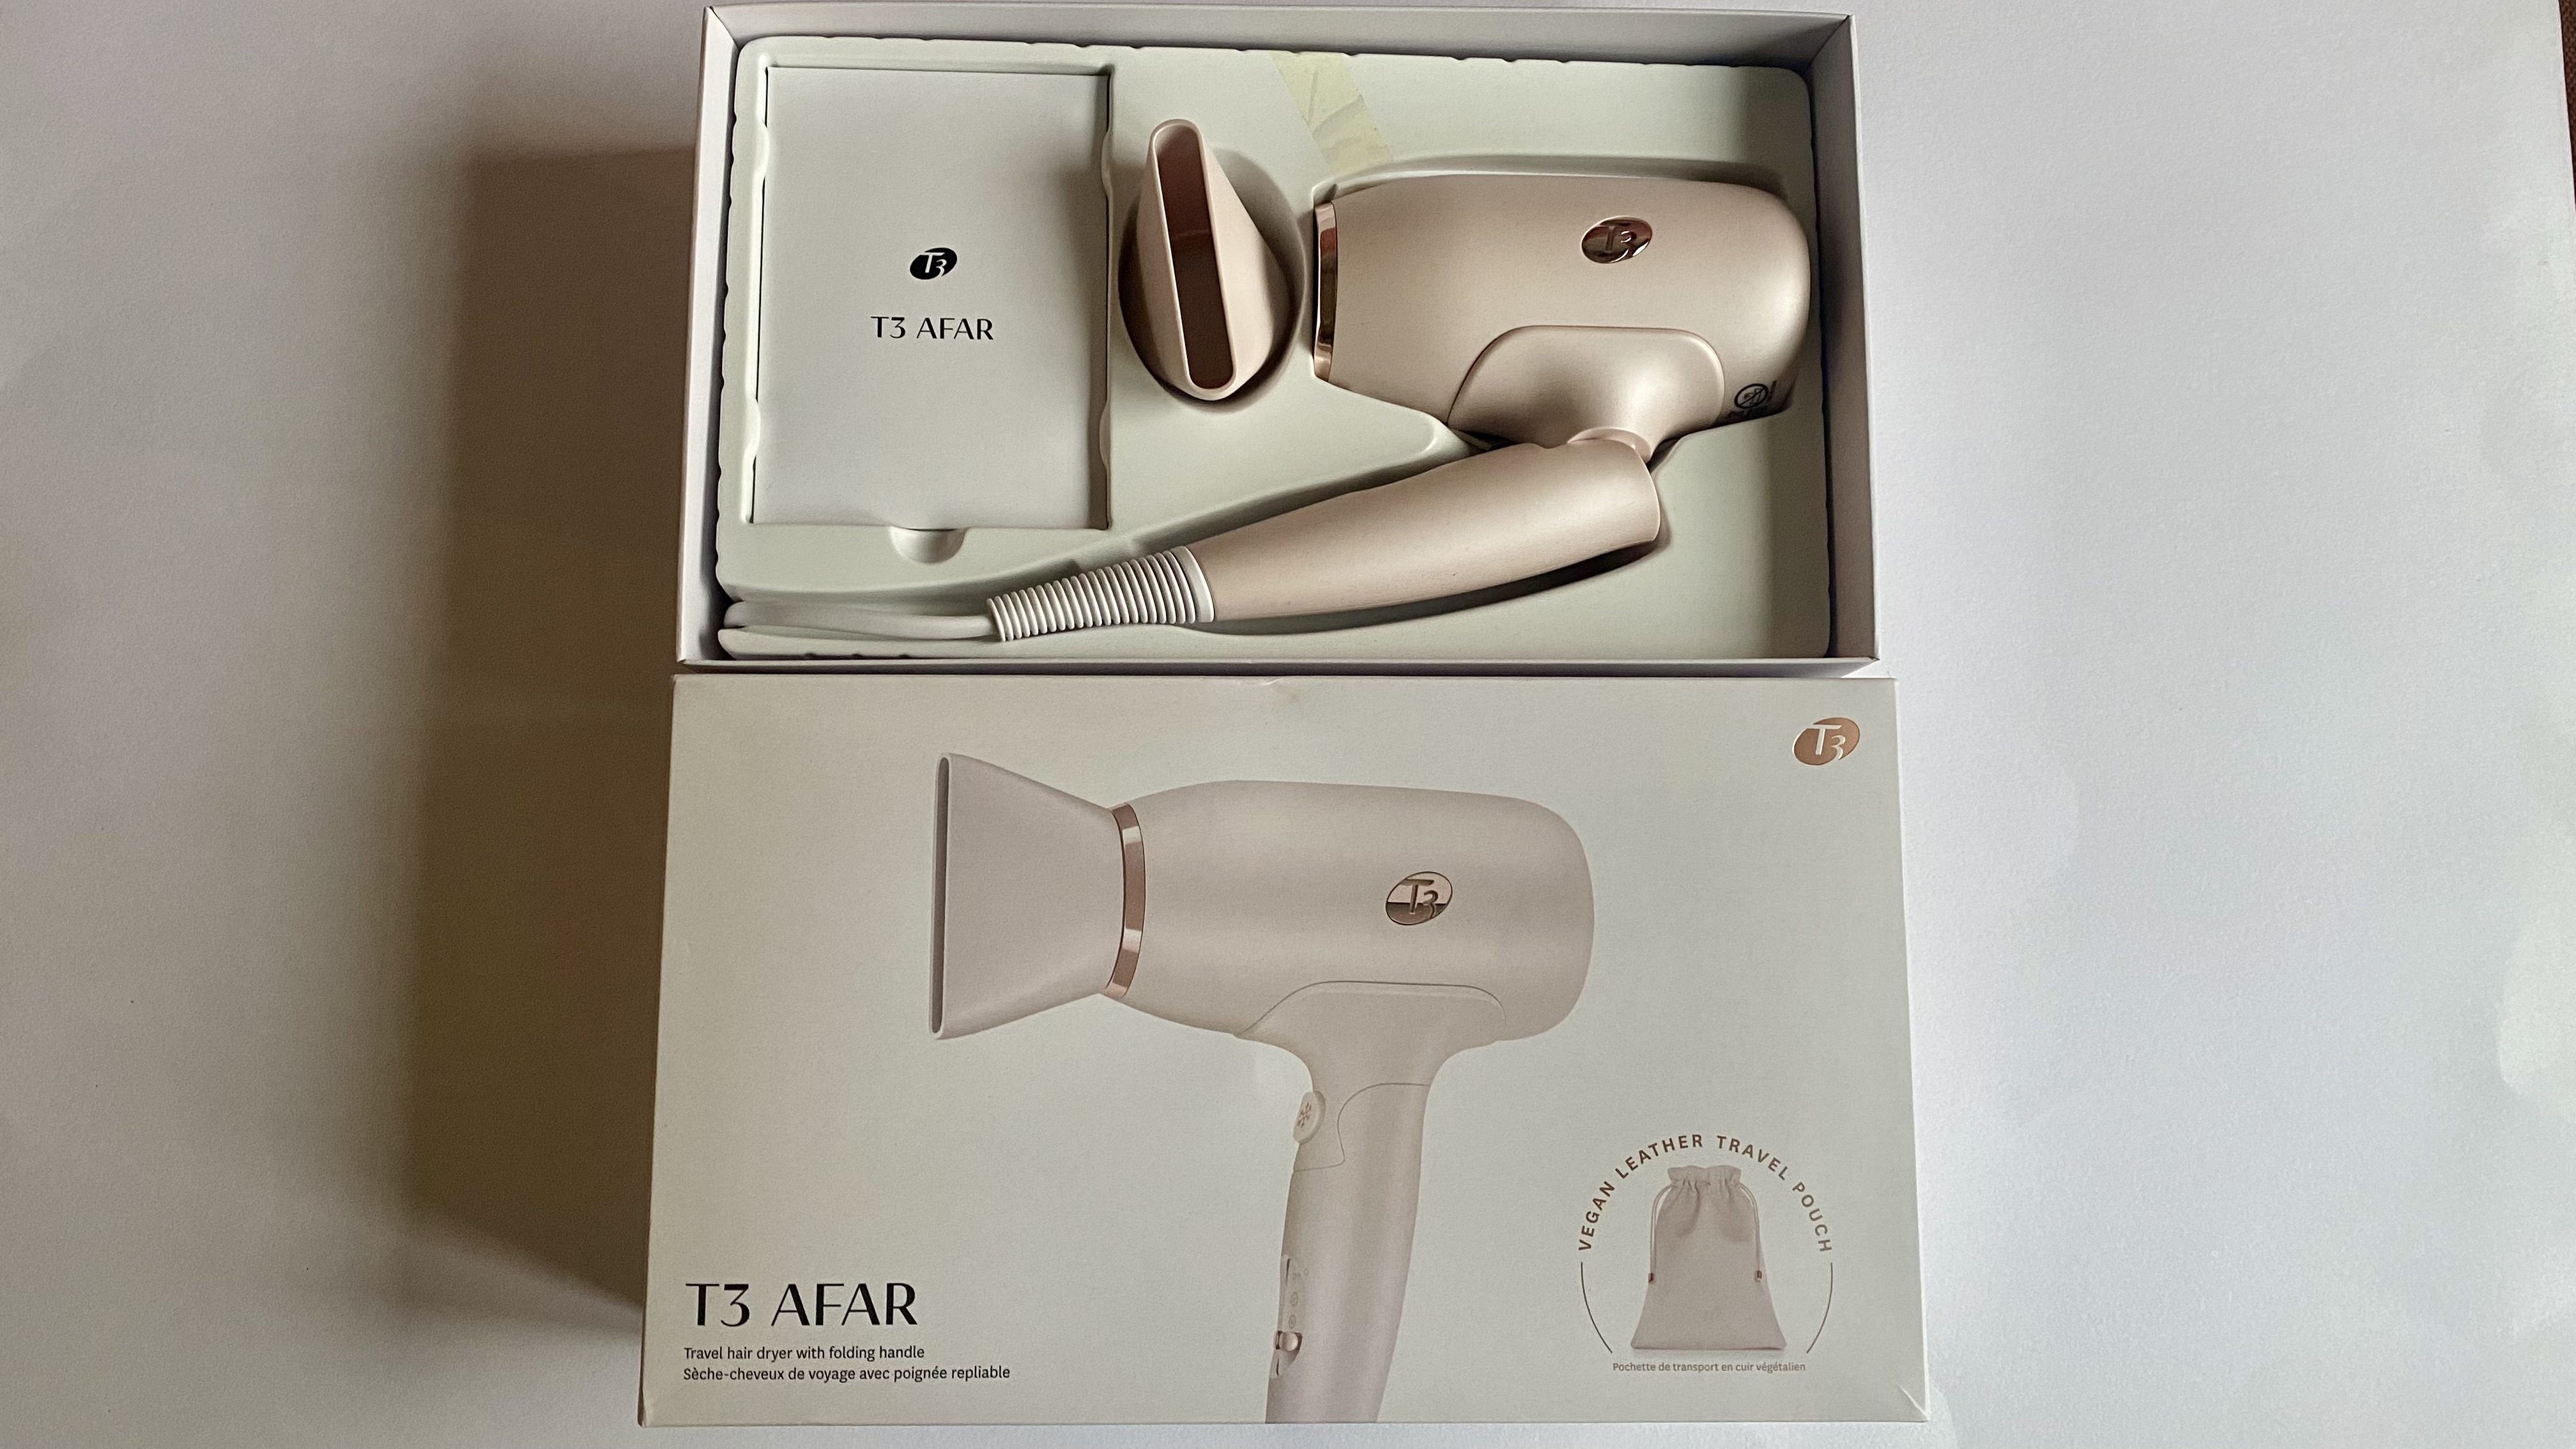 T3 AFAR hairdryer in the box